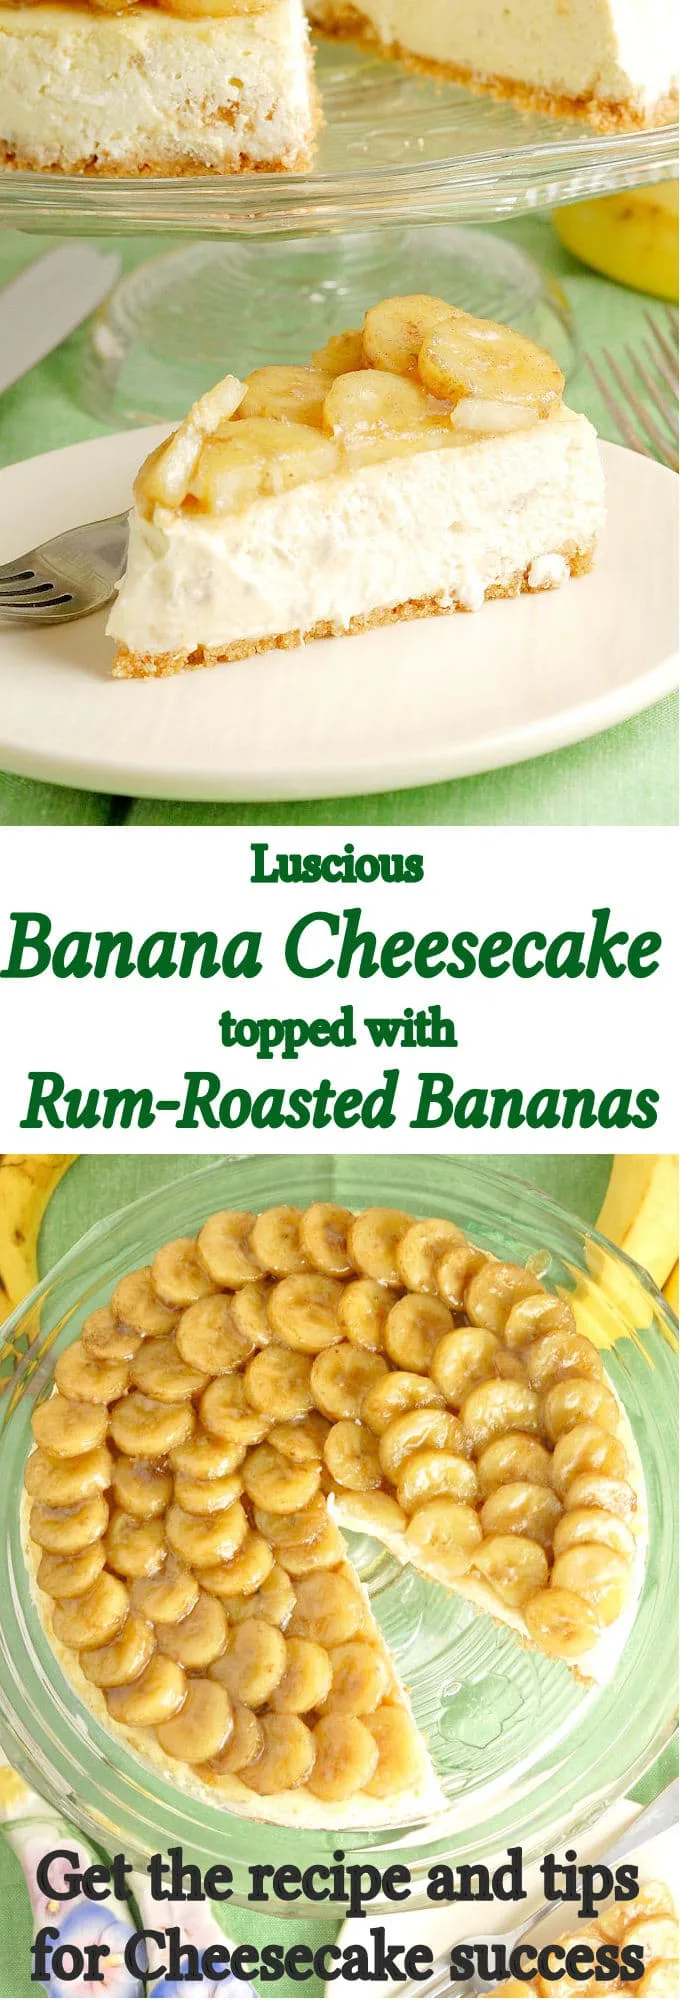 If you love bananas, this will be your new favorite dessert. Rum Roasted bananas make this banana cheesecake something very special.